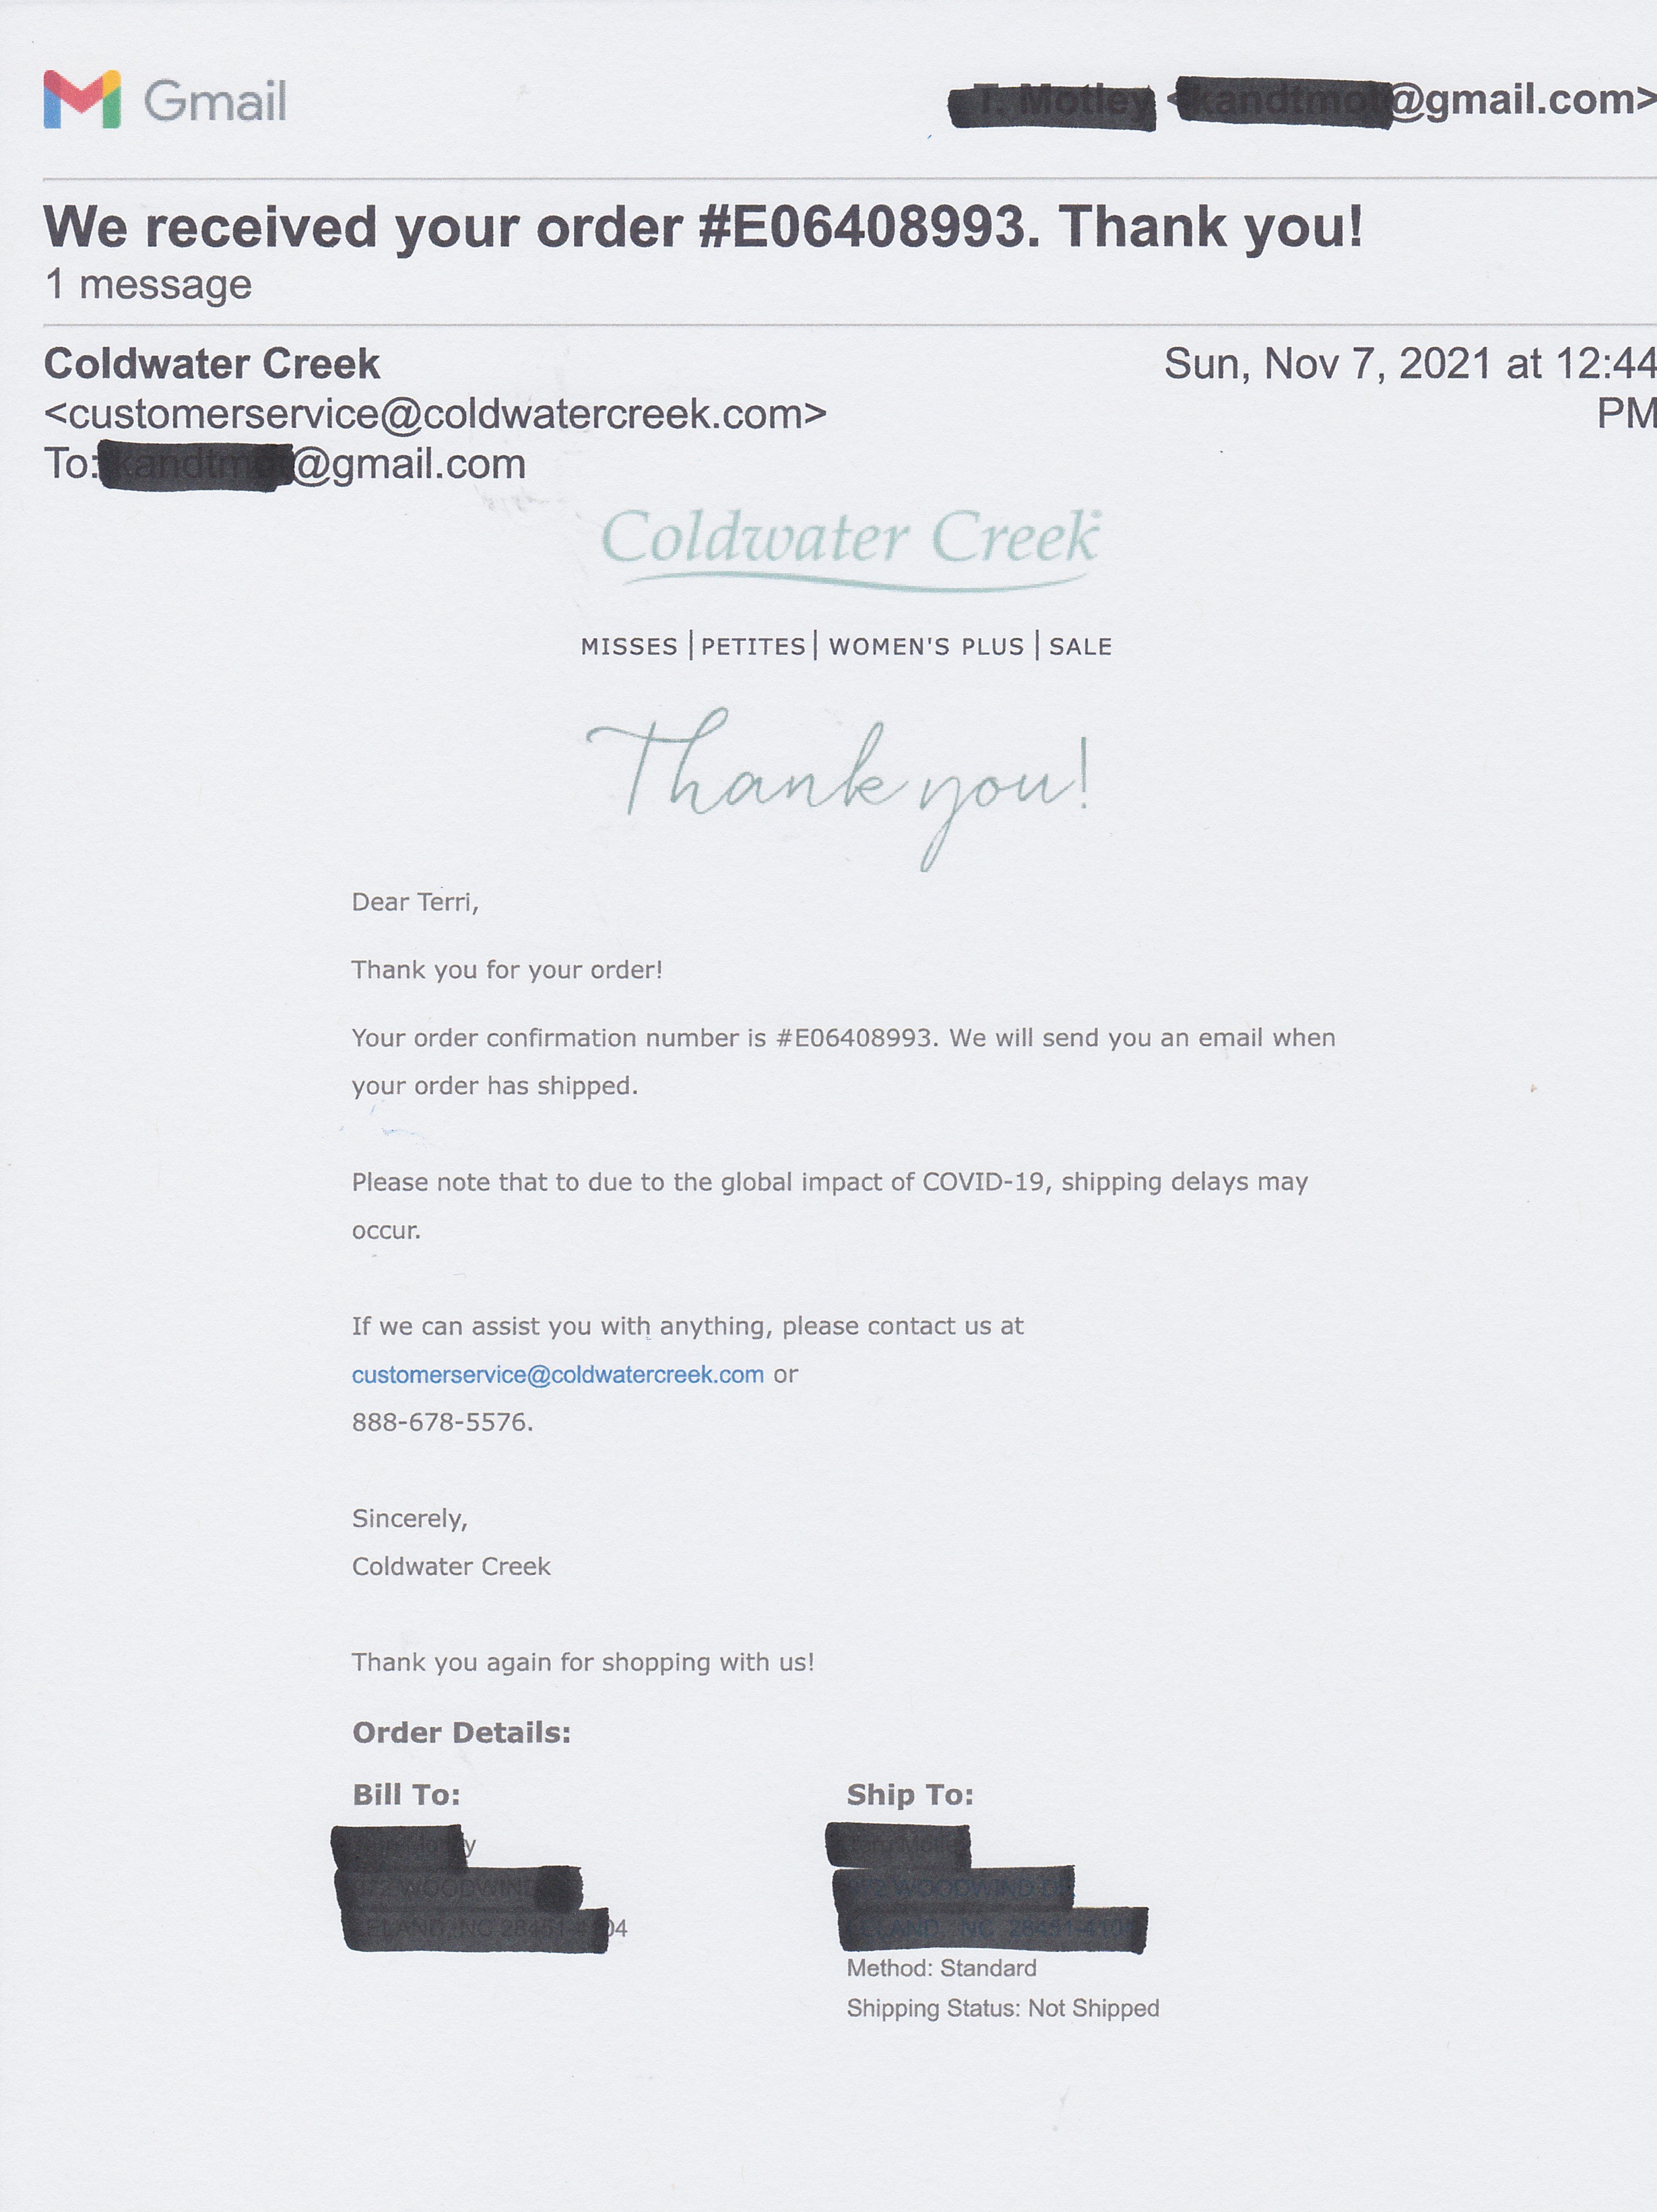 Is Orrisas.com's 80% Off Coldwater Creek Outlet Legit or a Scam?